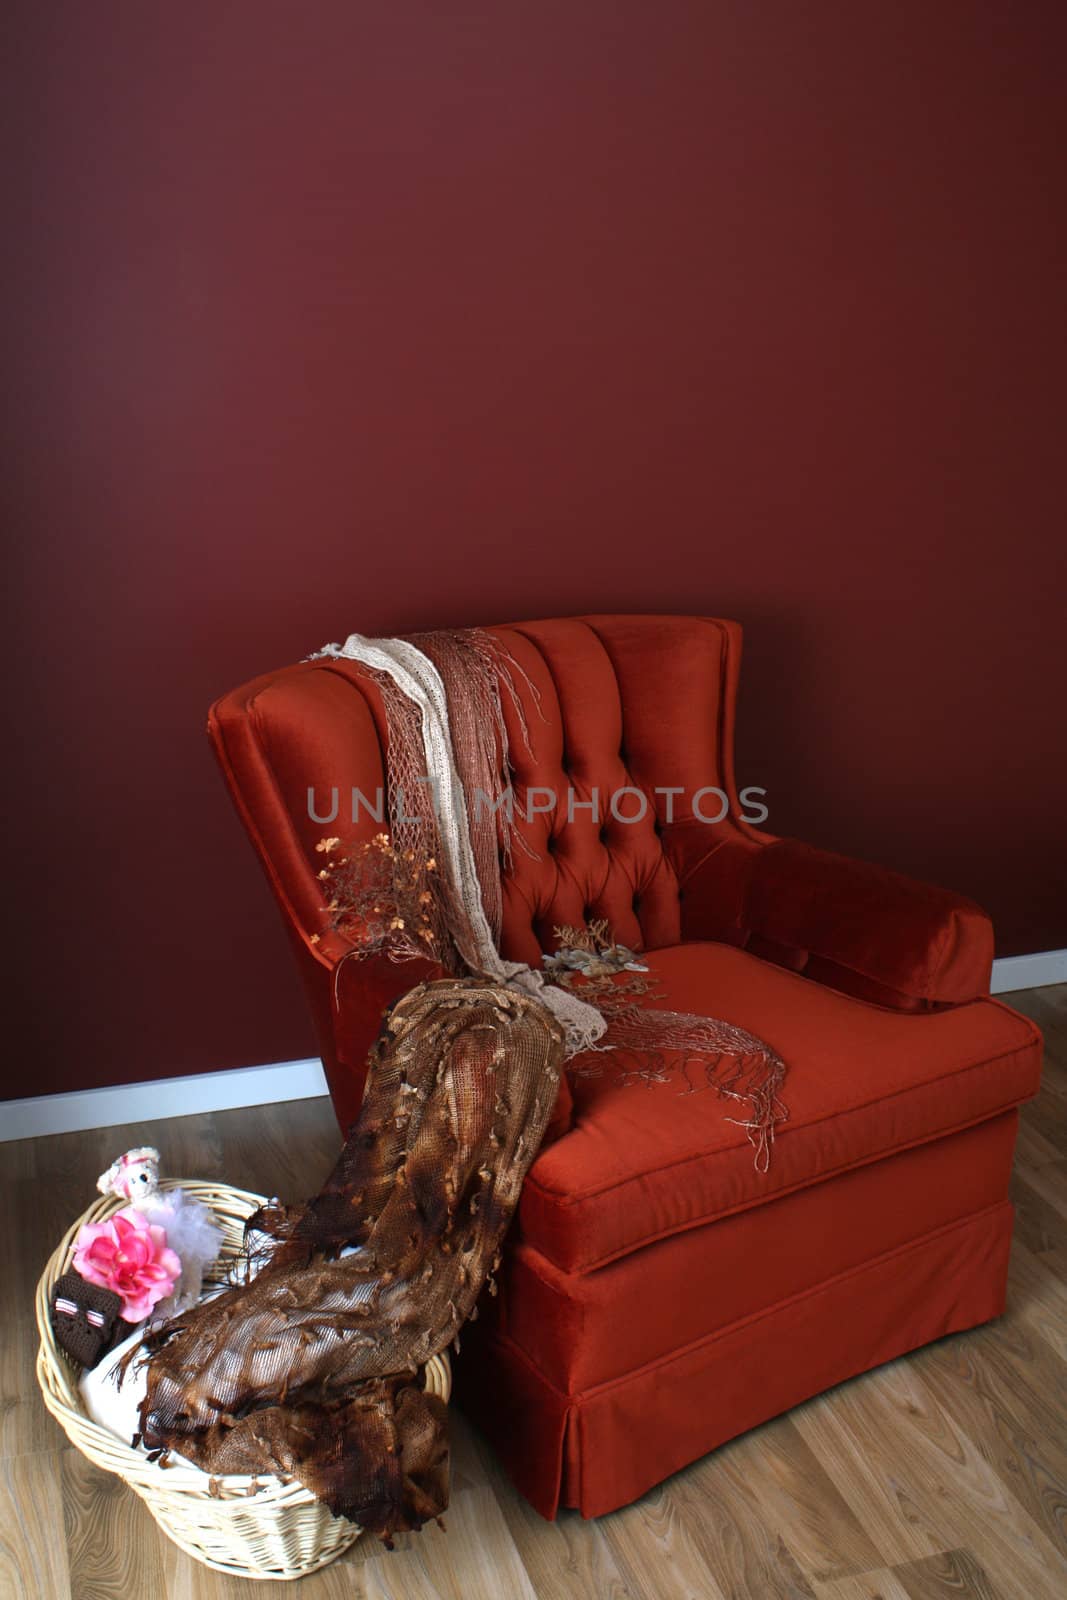 Red chair with basket on wooden floor